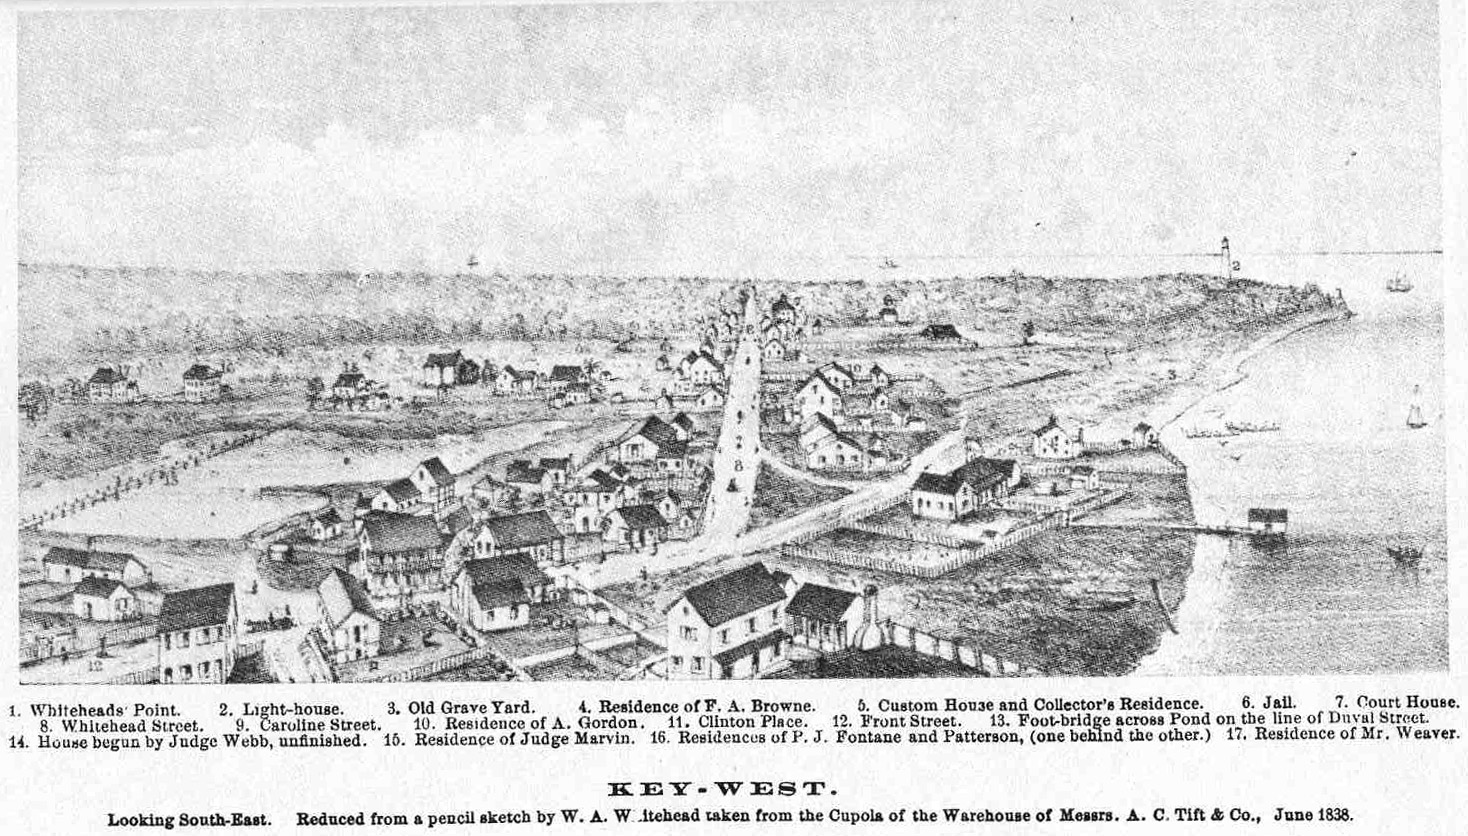 Second engraving of Key West in 1838 facing south, showing homes and the city’s first lighthouse kept by Michael Mabrity and, after his death, by Barbara Mabrity. [From “Key West: The Old and the New” (Browne, 1912)]